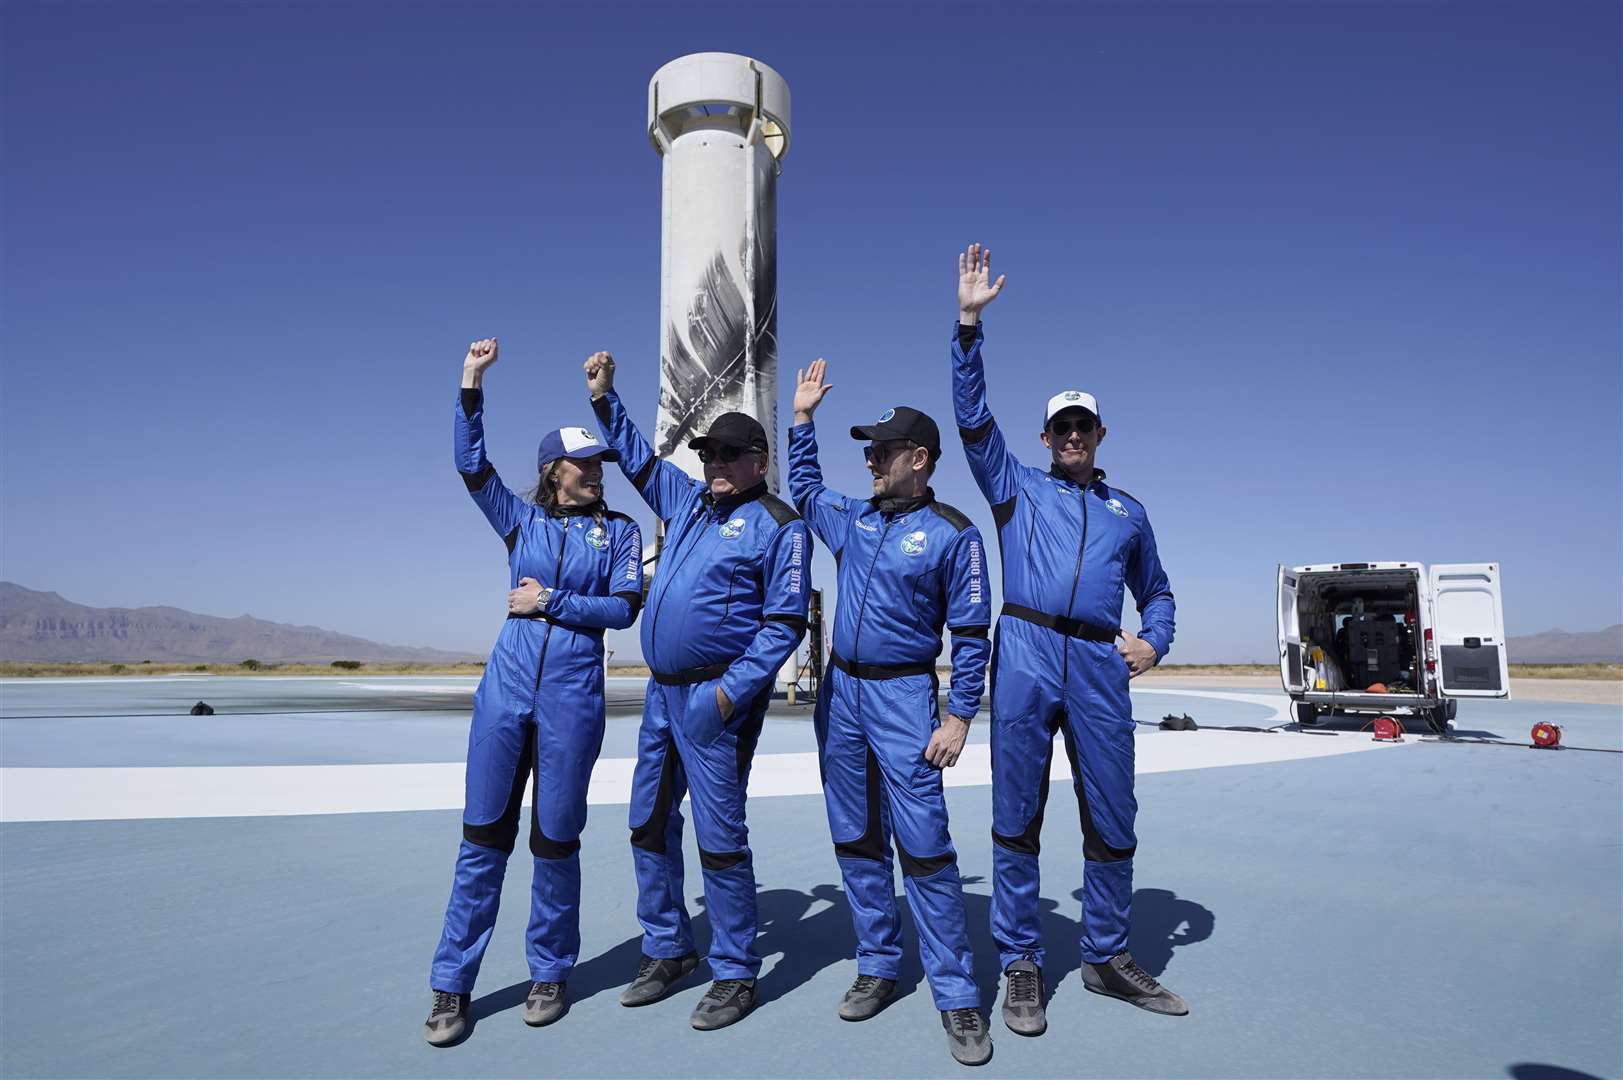 Blue Origin’s New Shepard rocket space passengers including William Shatner, second left (LM Otero/PA)